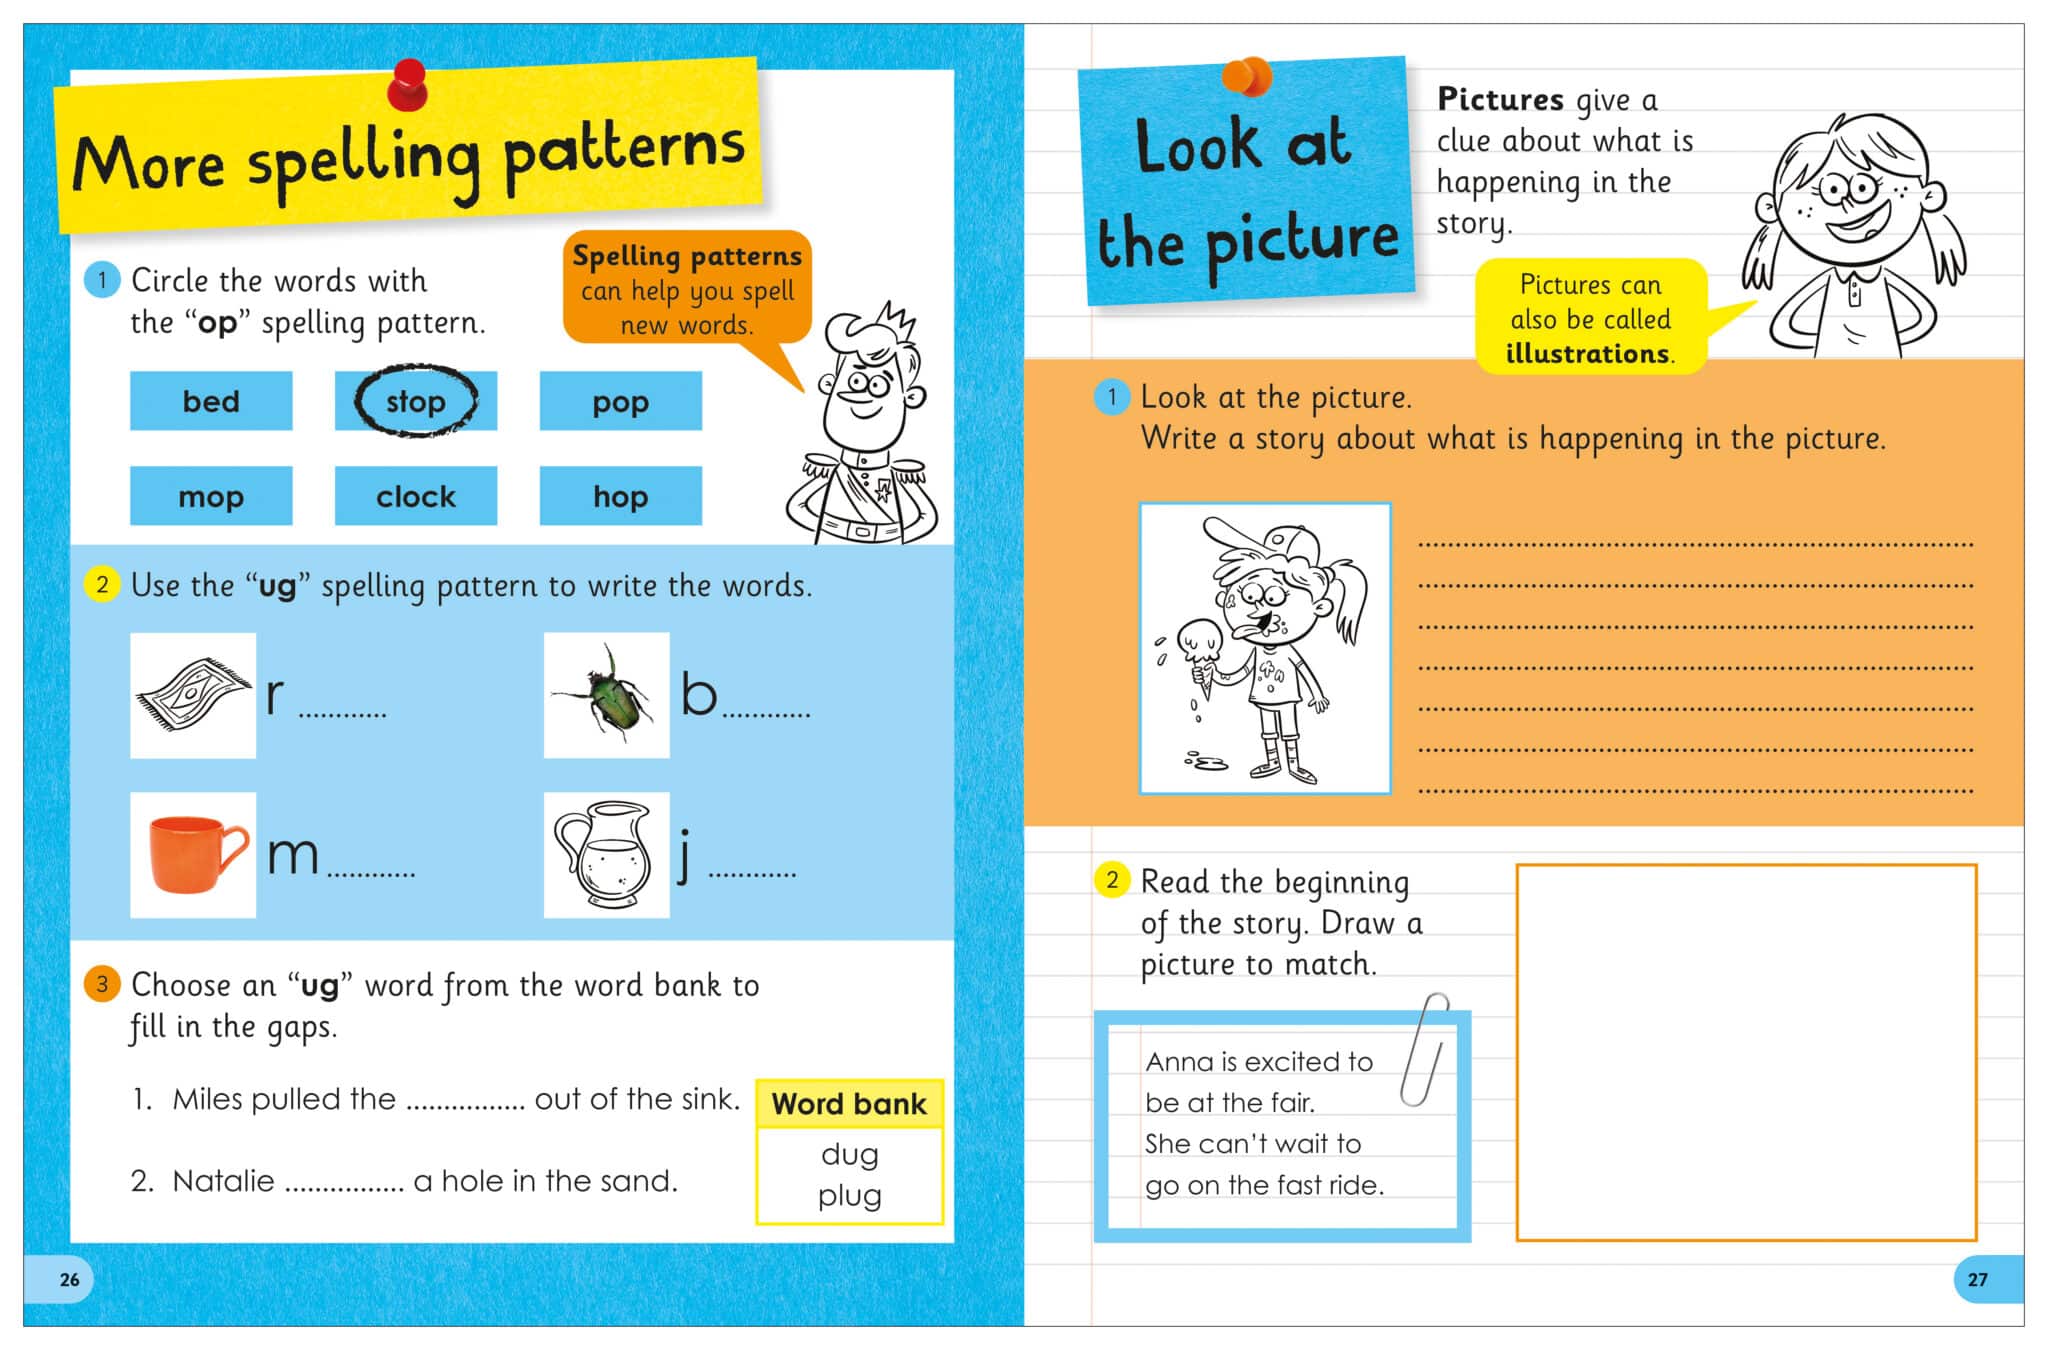 An educational workbook page featuring spelling activities with illustrations of a girl, a dog, and classroom objects like a mop and a clock. instructions prompt circling words and filling in blanks.